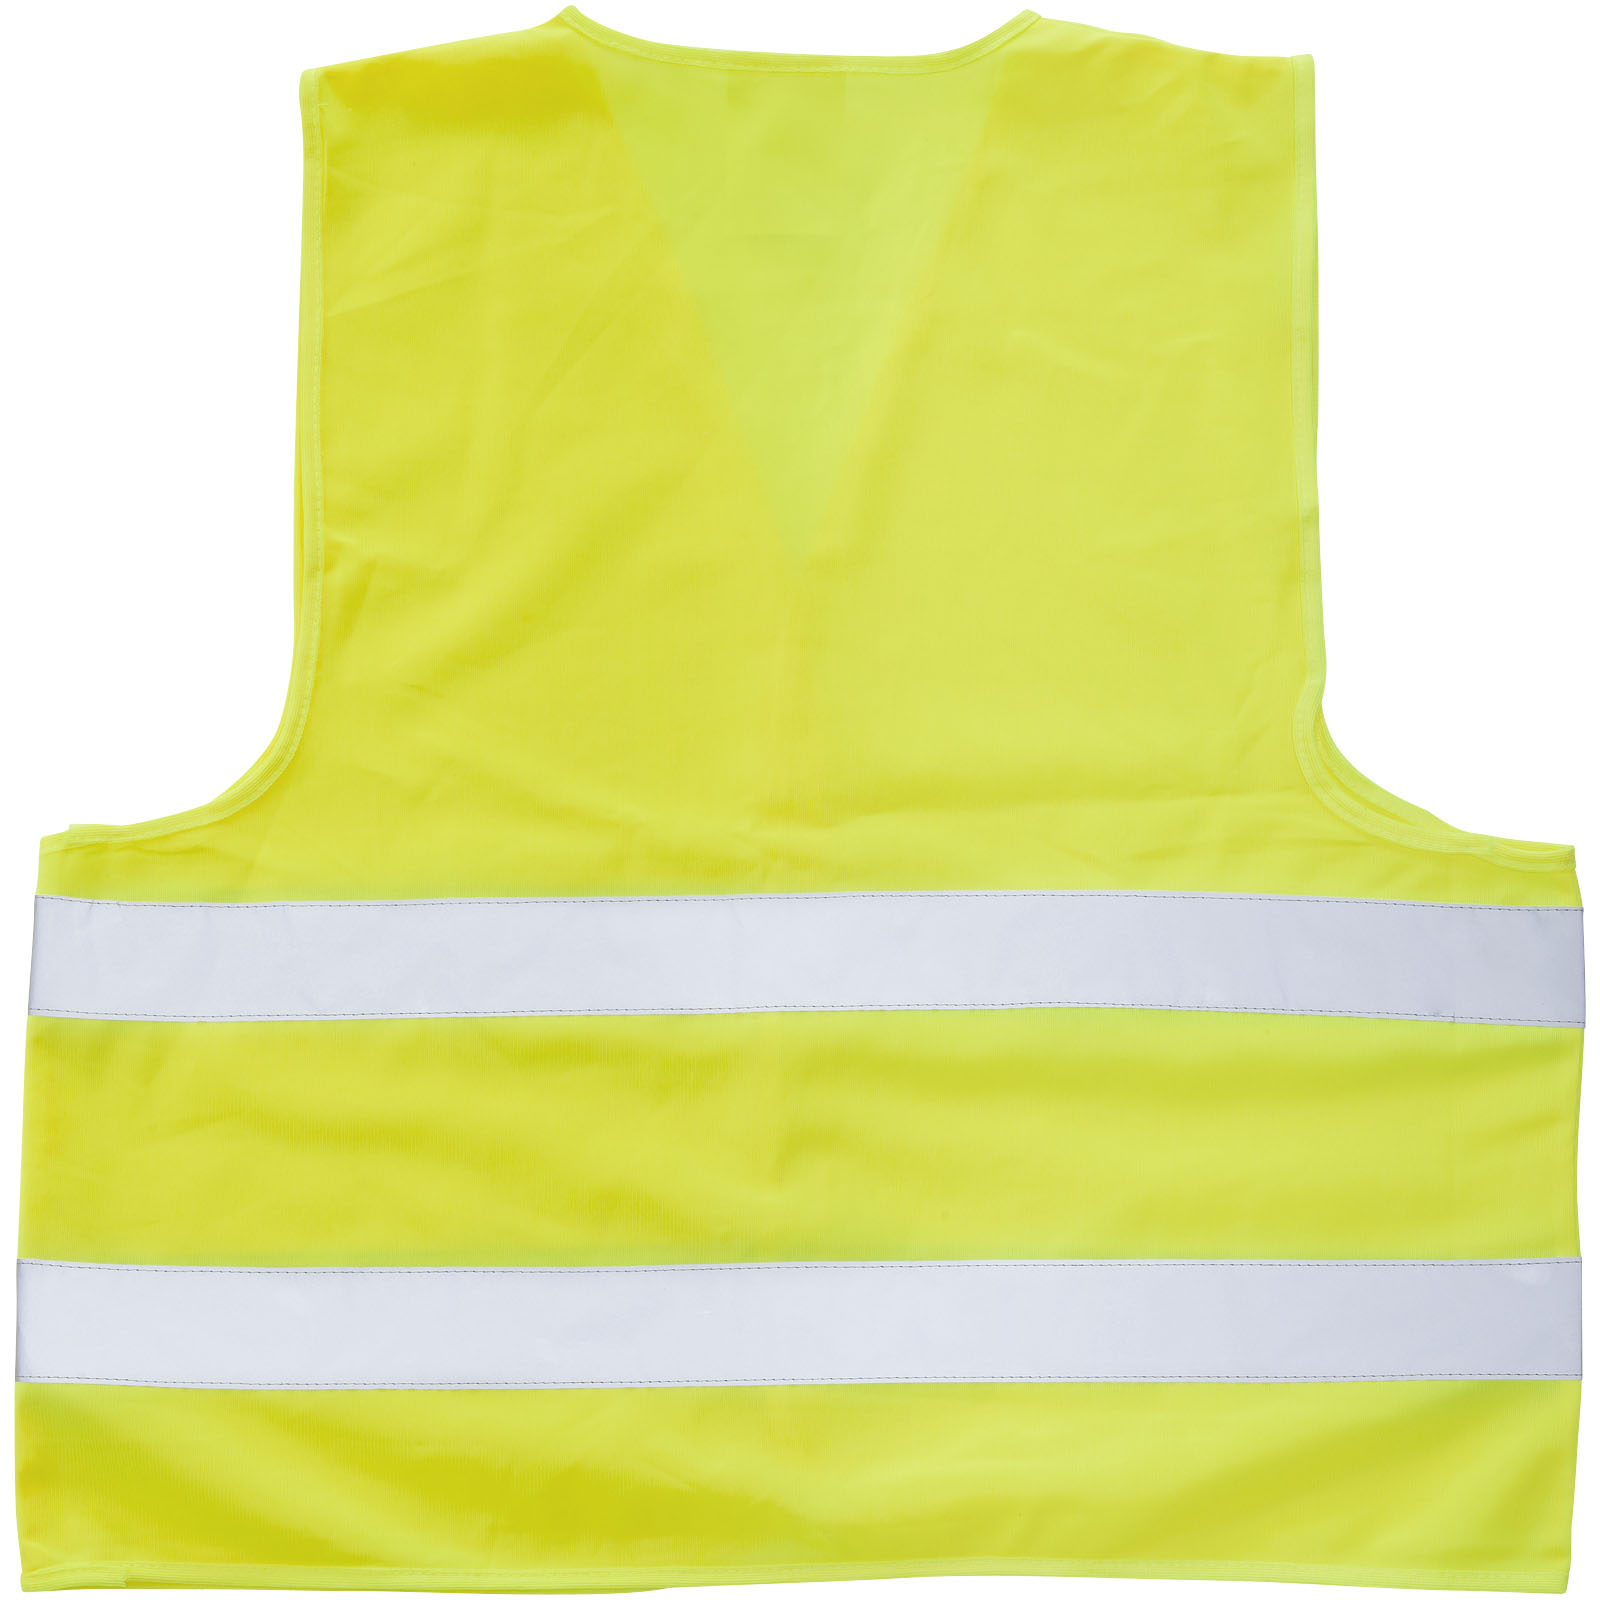 Advertising Safety Vests - RFX™ Watch-out XL safety vest in pouch for professional use - 3